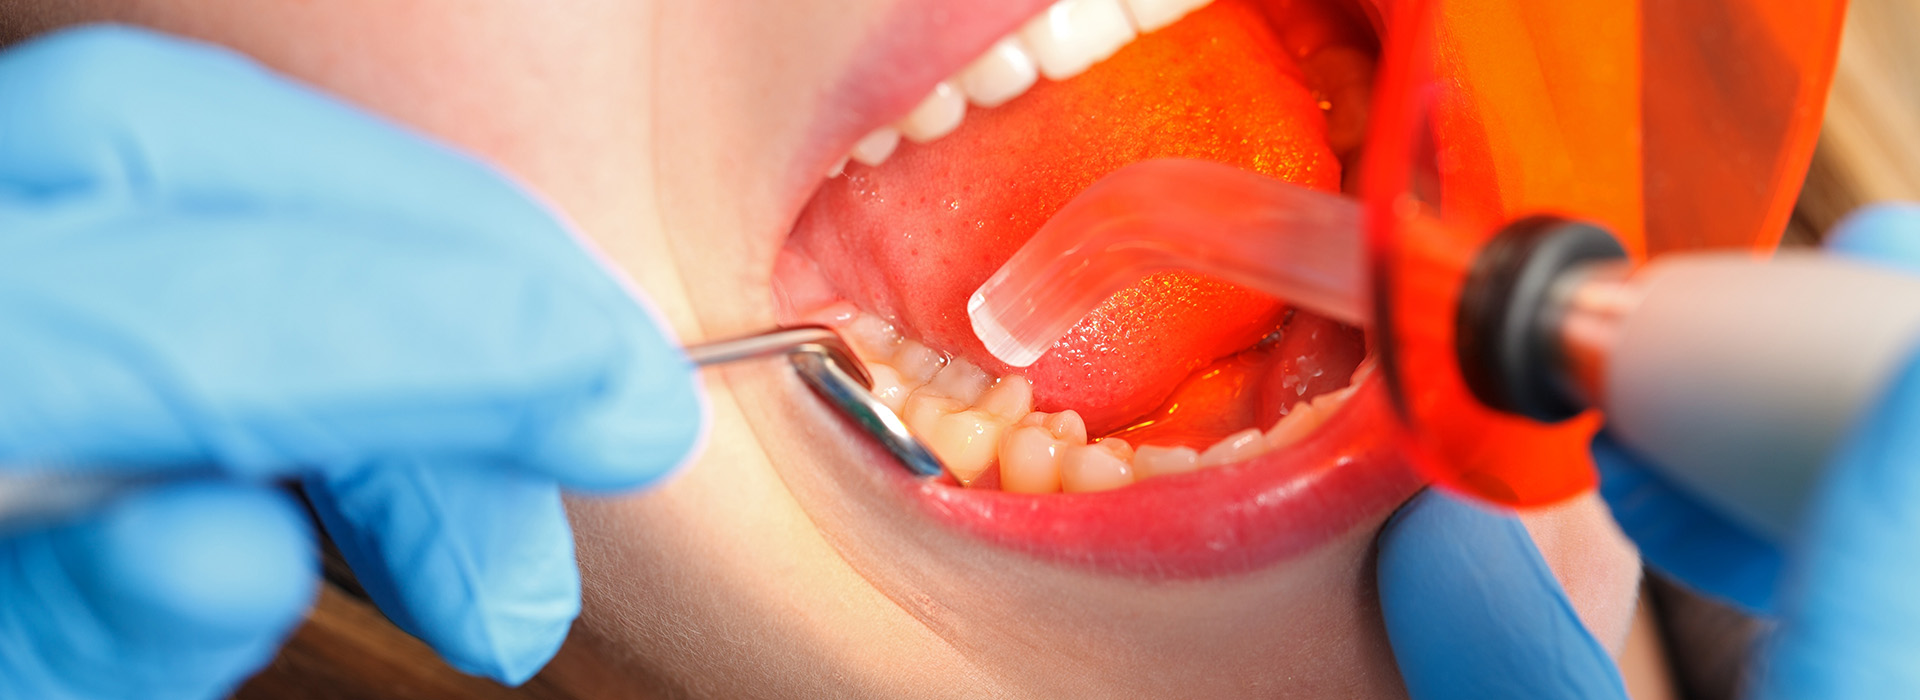 Pauly Dental | Emergency Treatment, Crowns  amp  Caps and Dental Cleanings